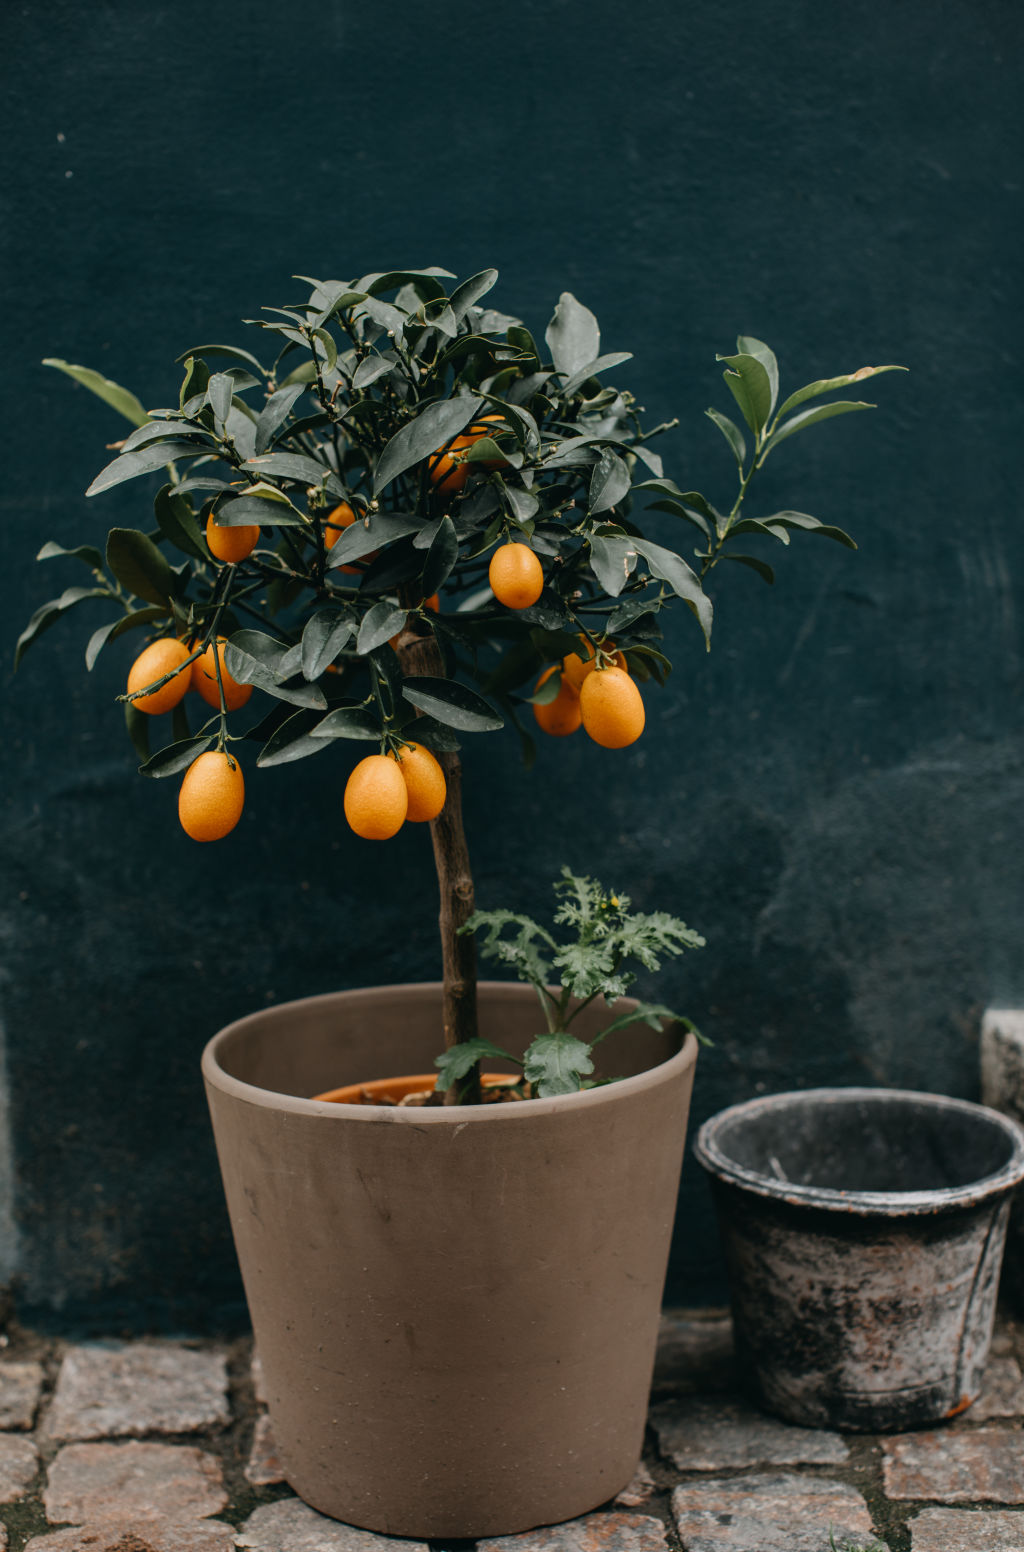 Dwarf fruit trees are available for a wide range of fruit varieties. Photo: Stocksy